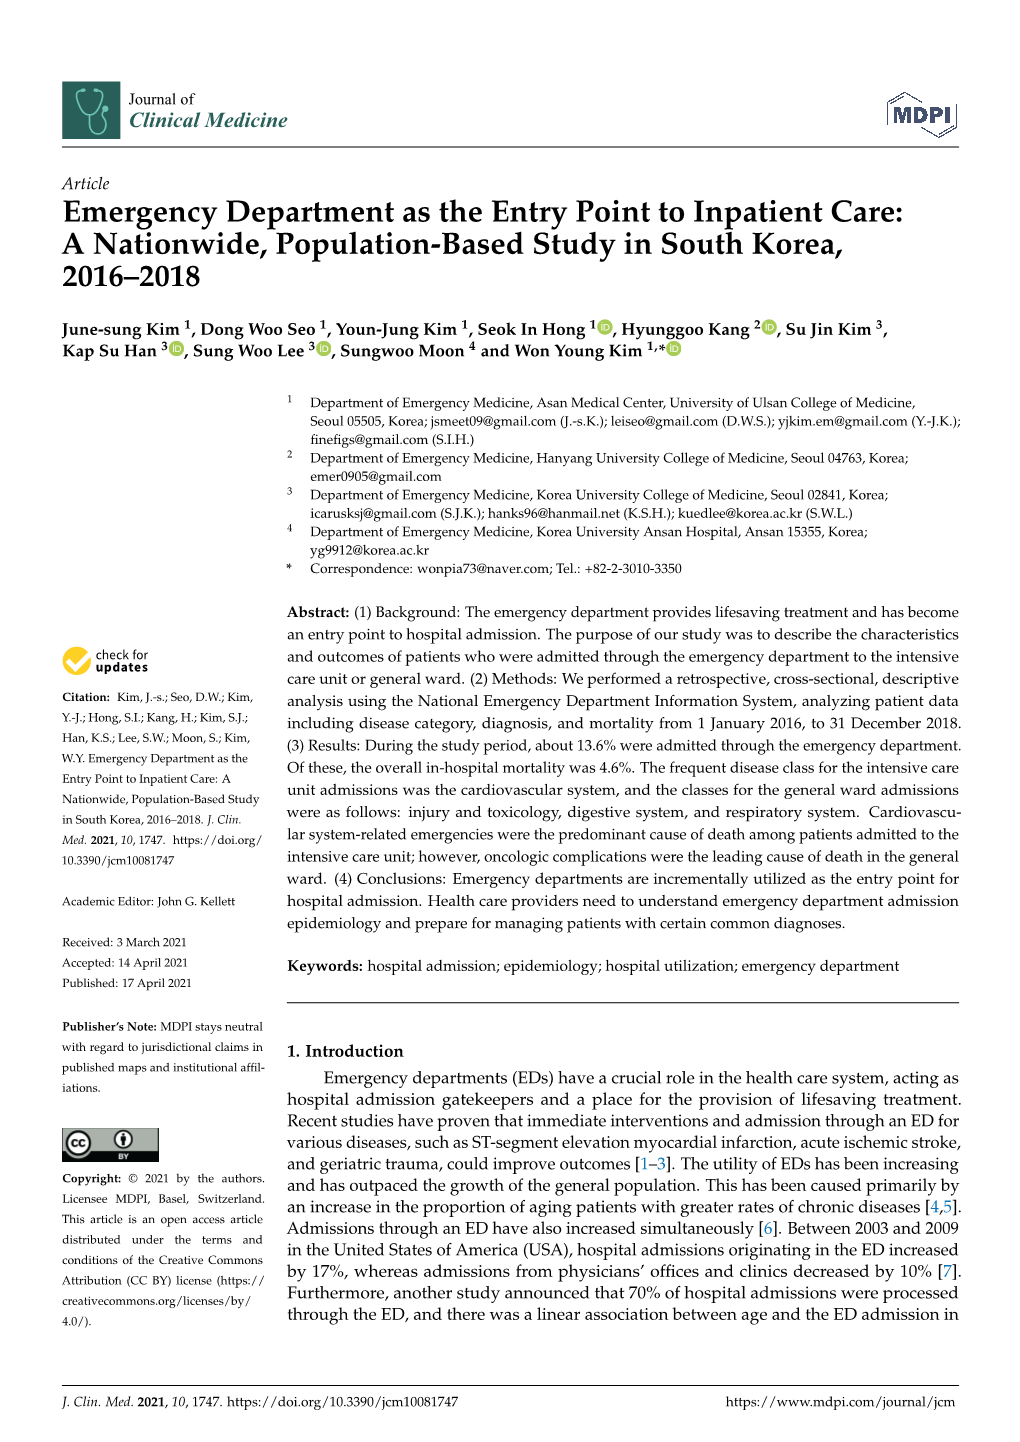 Emergency Department As the Entry Point to Inpatient Care: a Nationwide, Population-Based Study in South Korea, 2016–2018